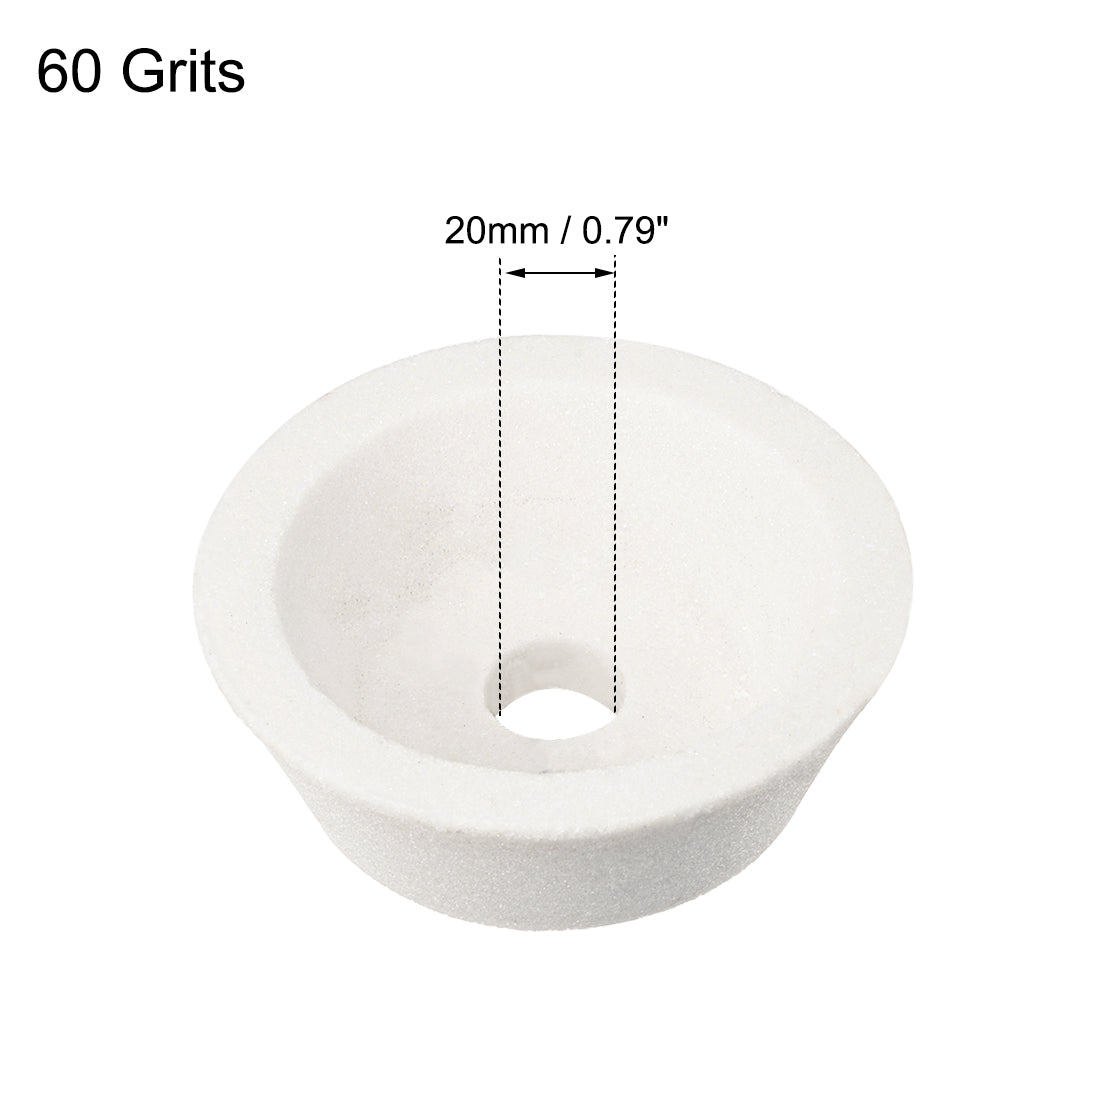 uxcell Uxcell 4-Inch Flaring Cup Grinding Wheel 60 Grits White Aluminum Oxide Wheel Surface Grinding Abrasive Wheel Ceramic Tool